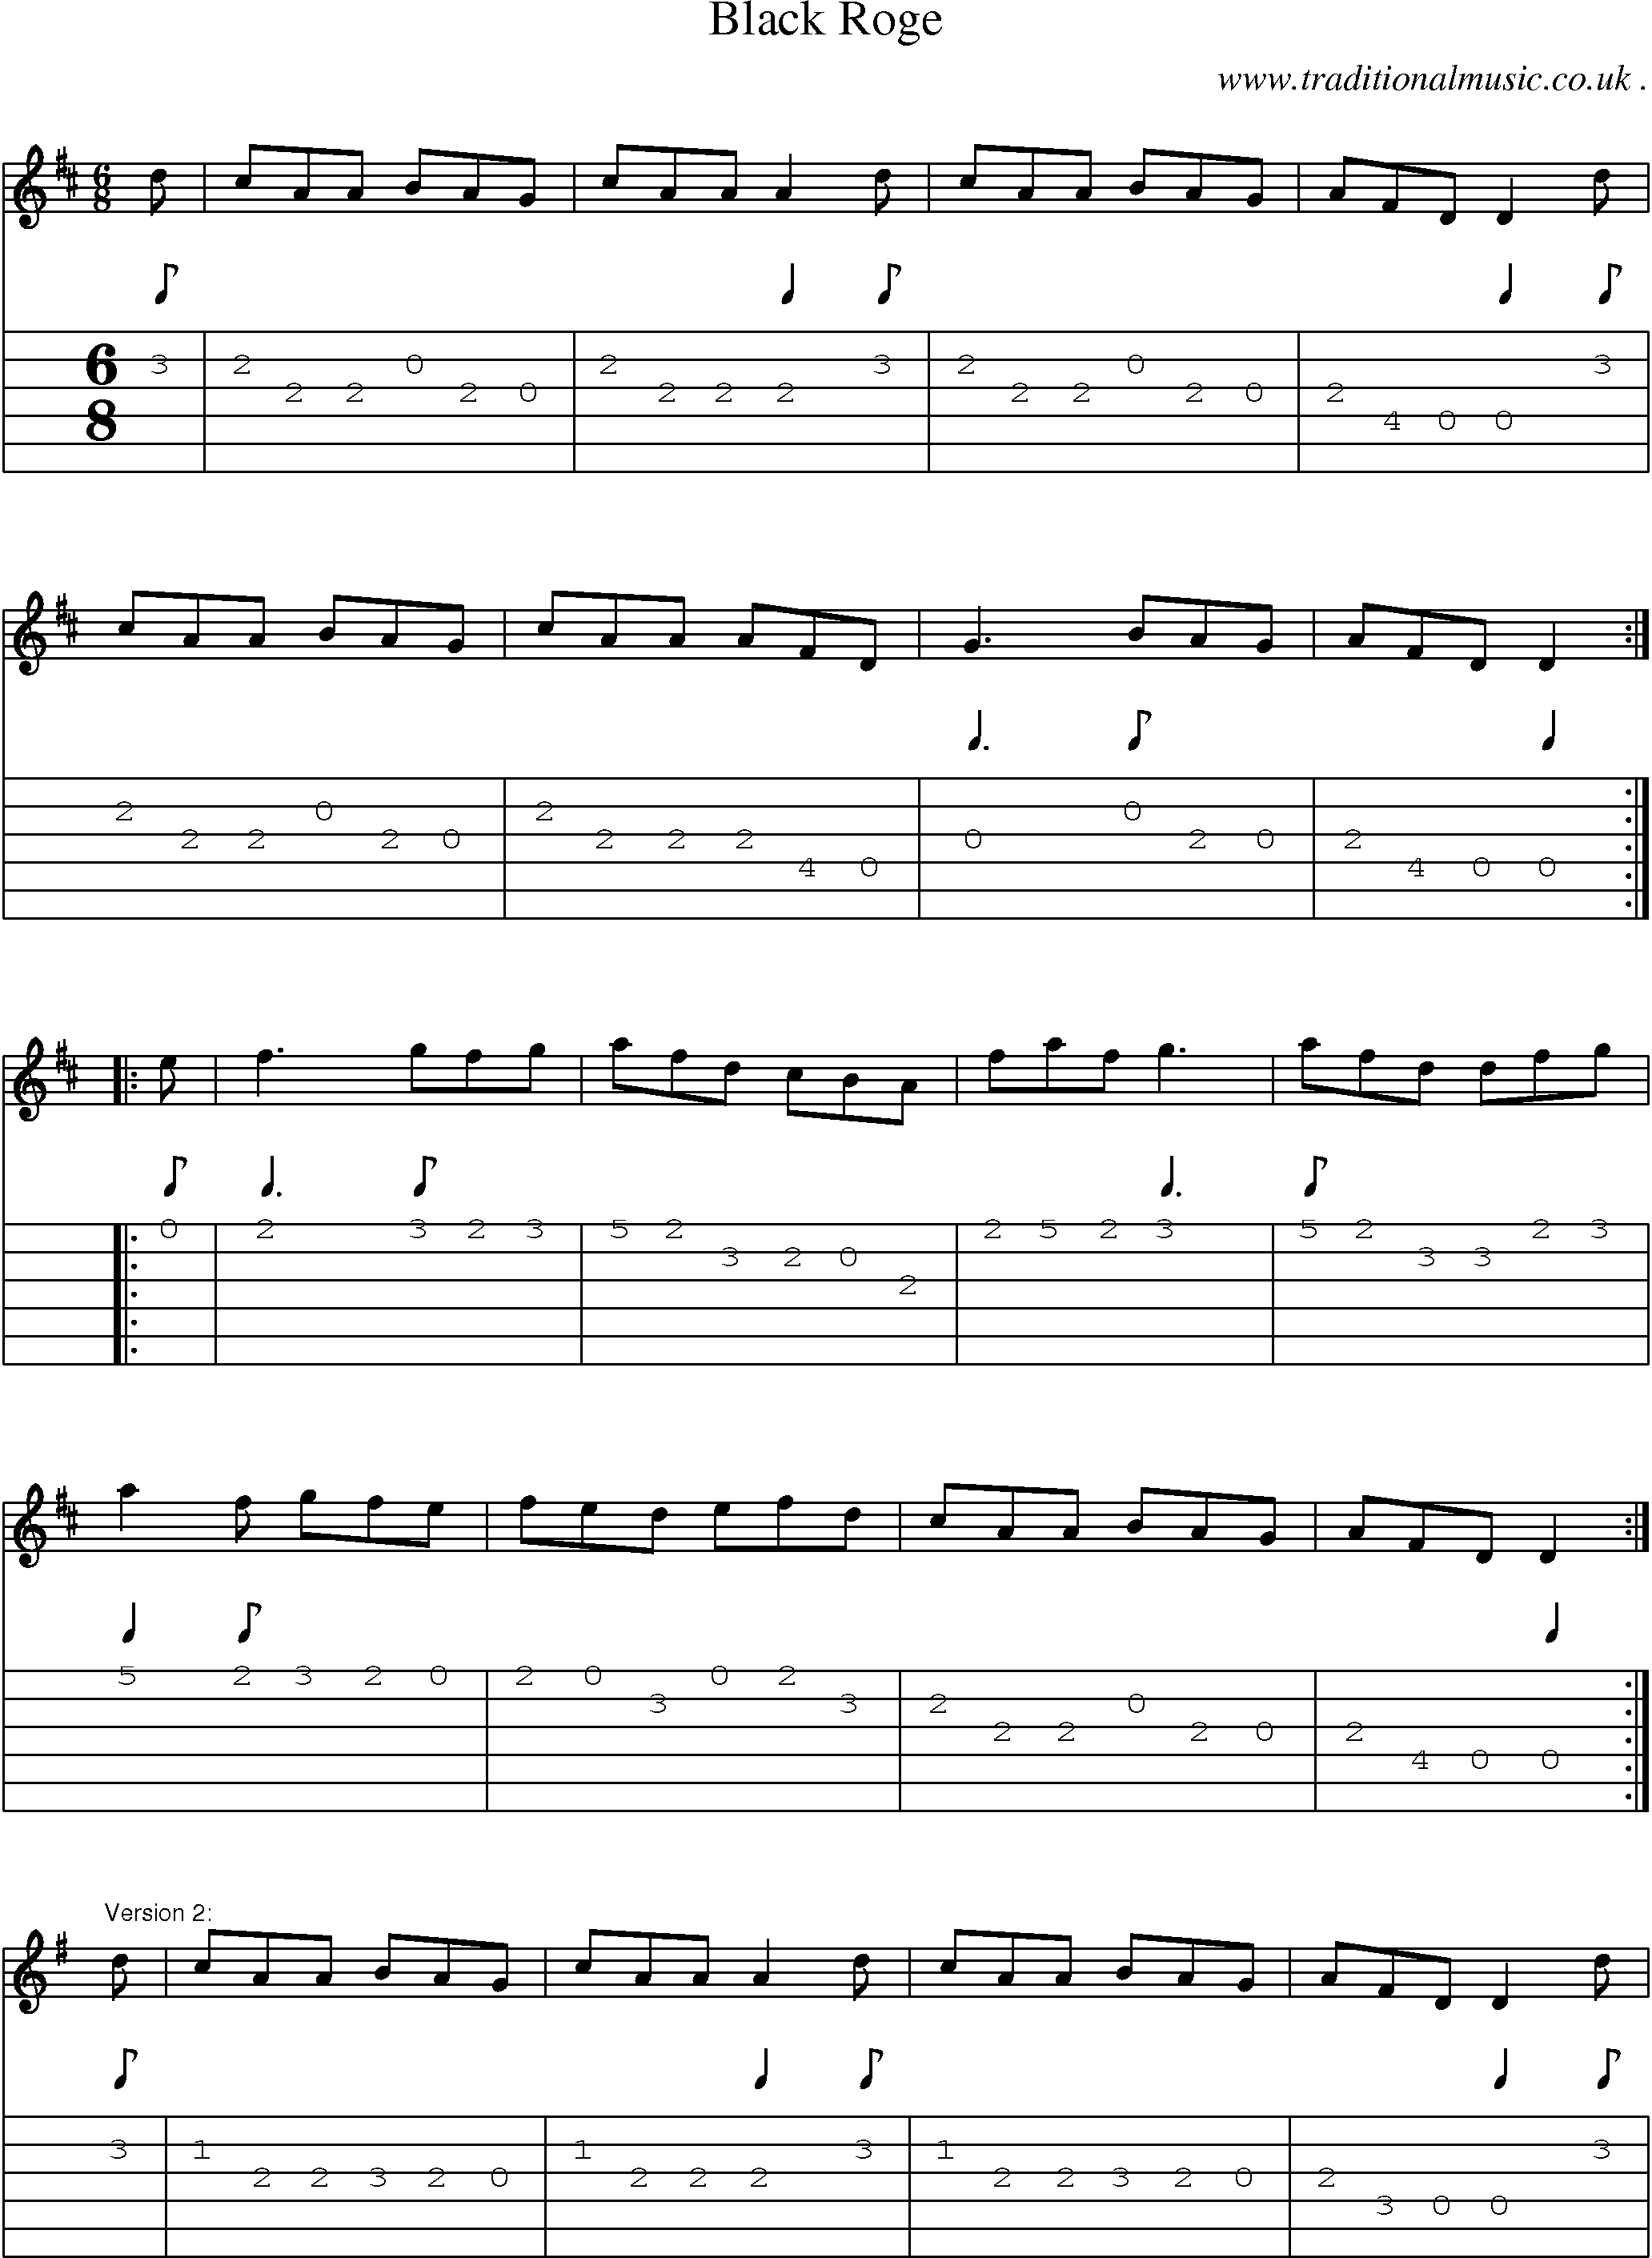 Sheet-Music and Guitar Tabs for Black Roge